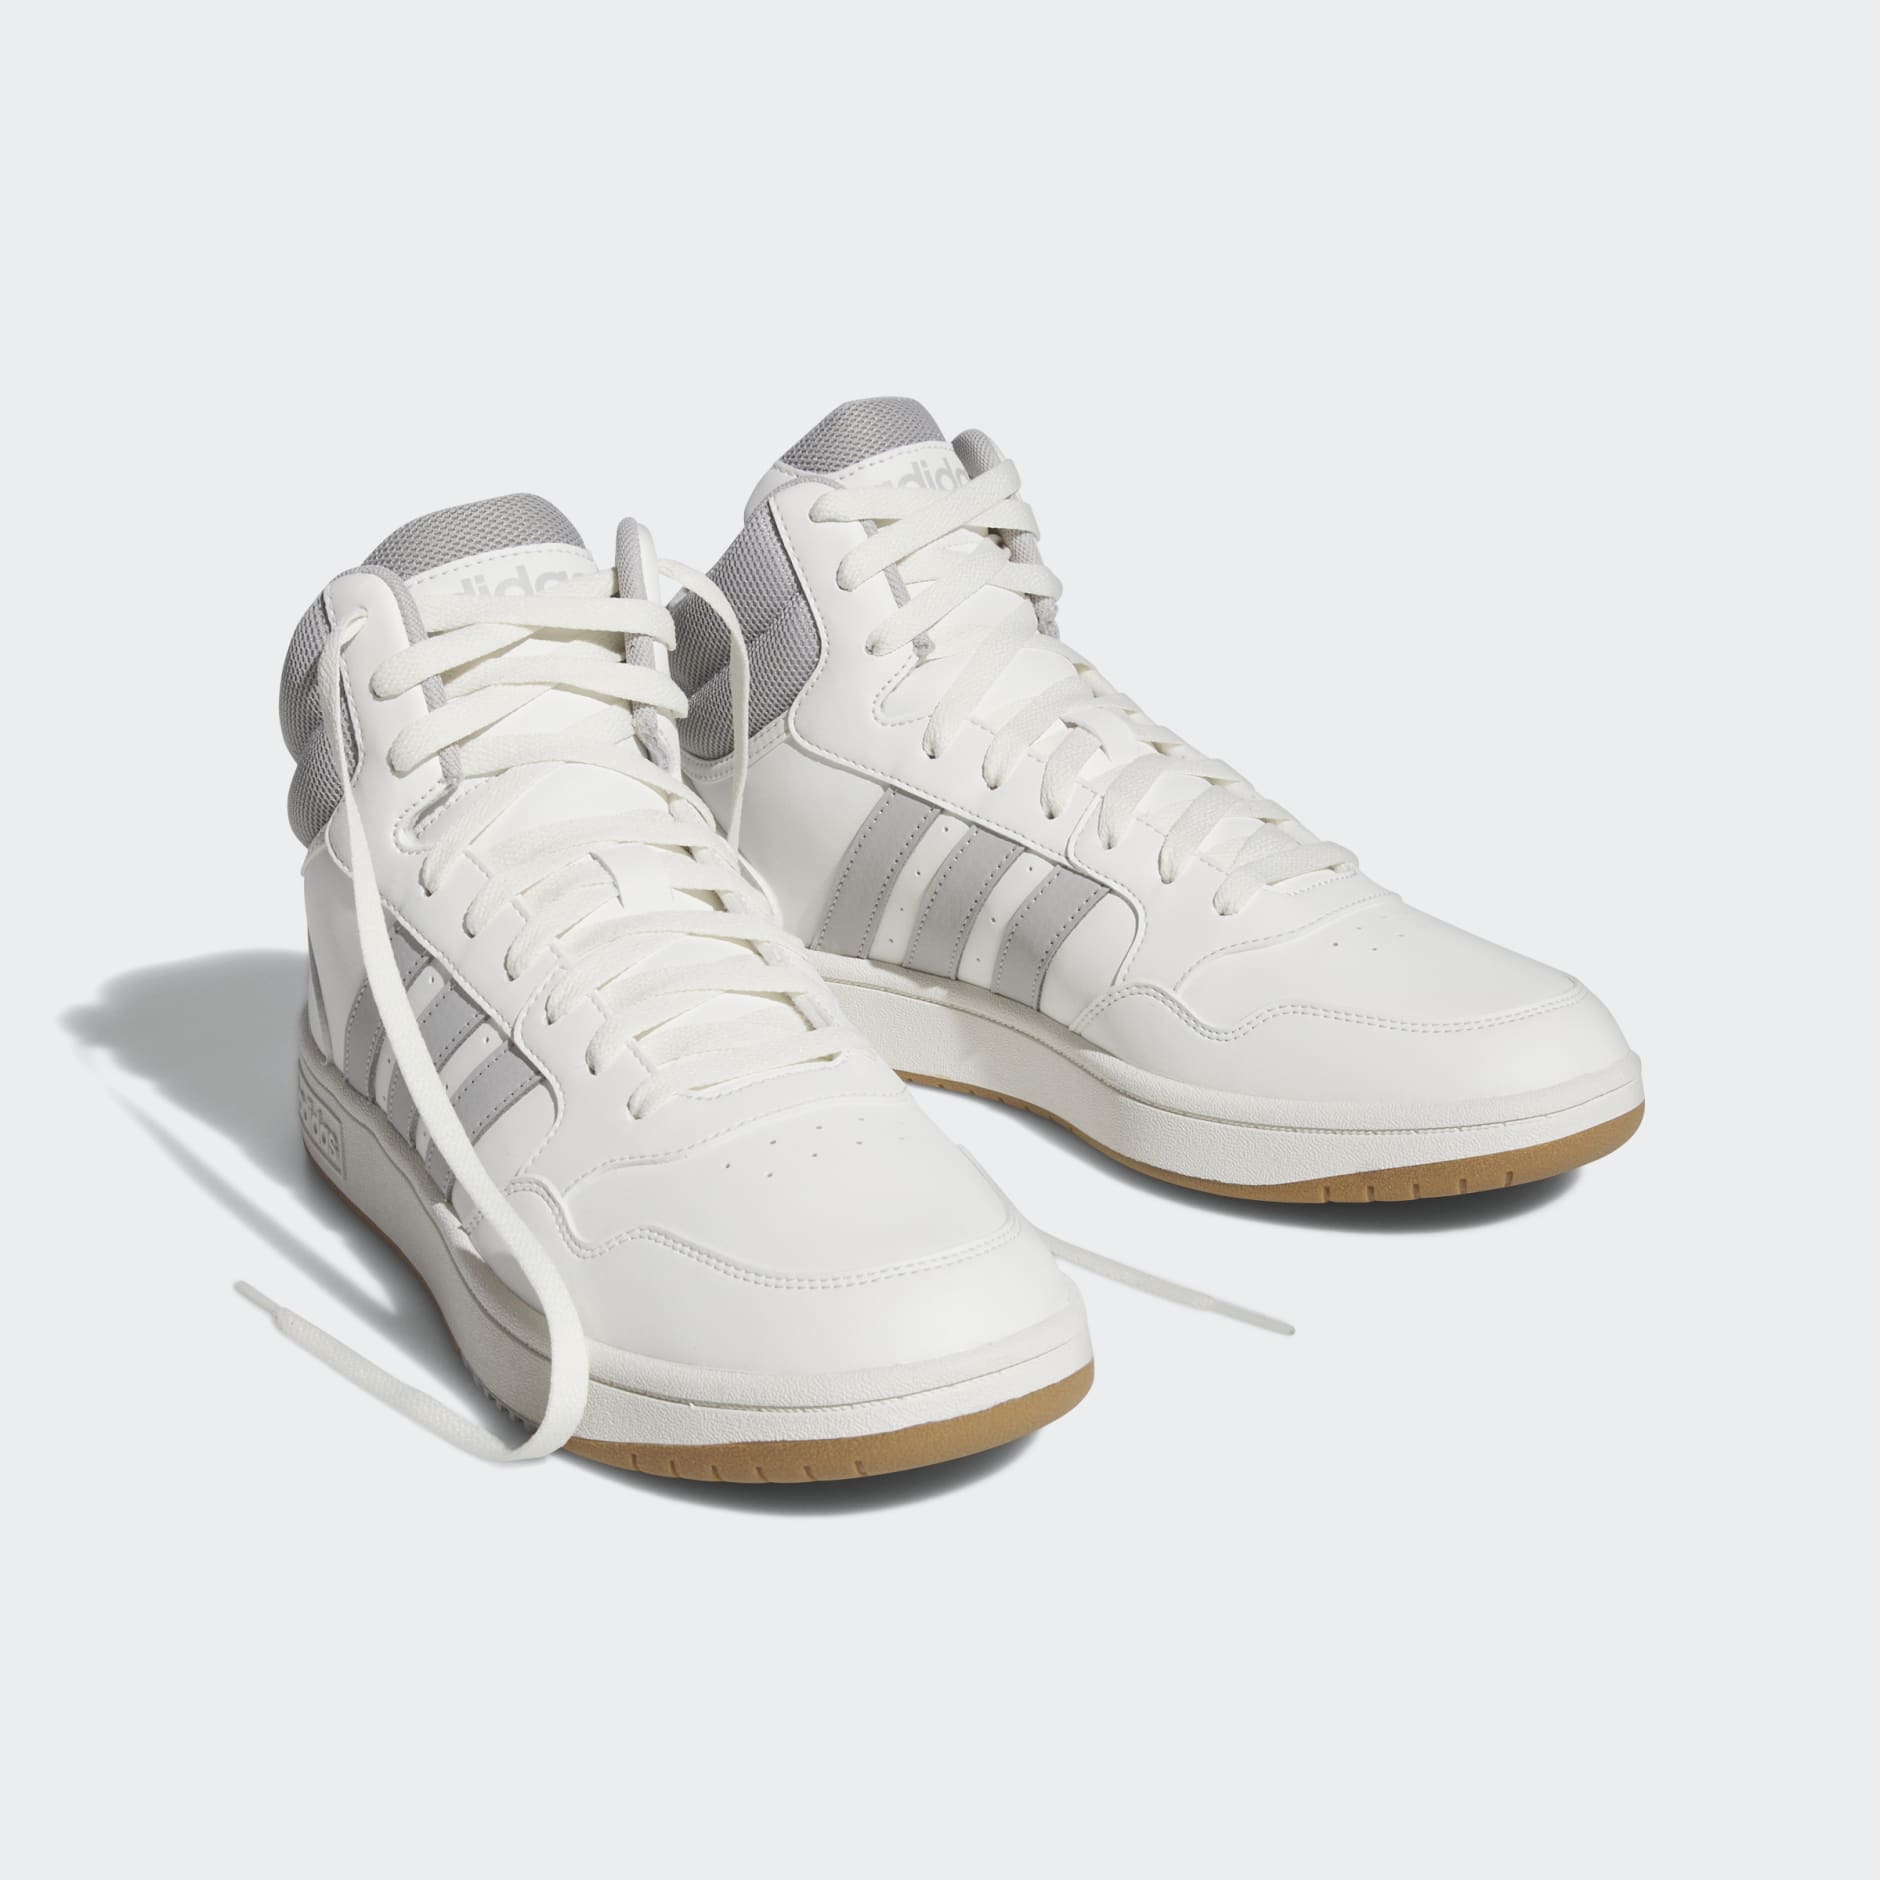 adidas Hoops 3.0 Mid Lifestyle Basketball Classic Vintage Shoes - White ...